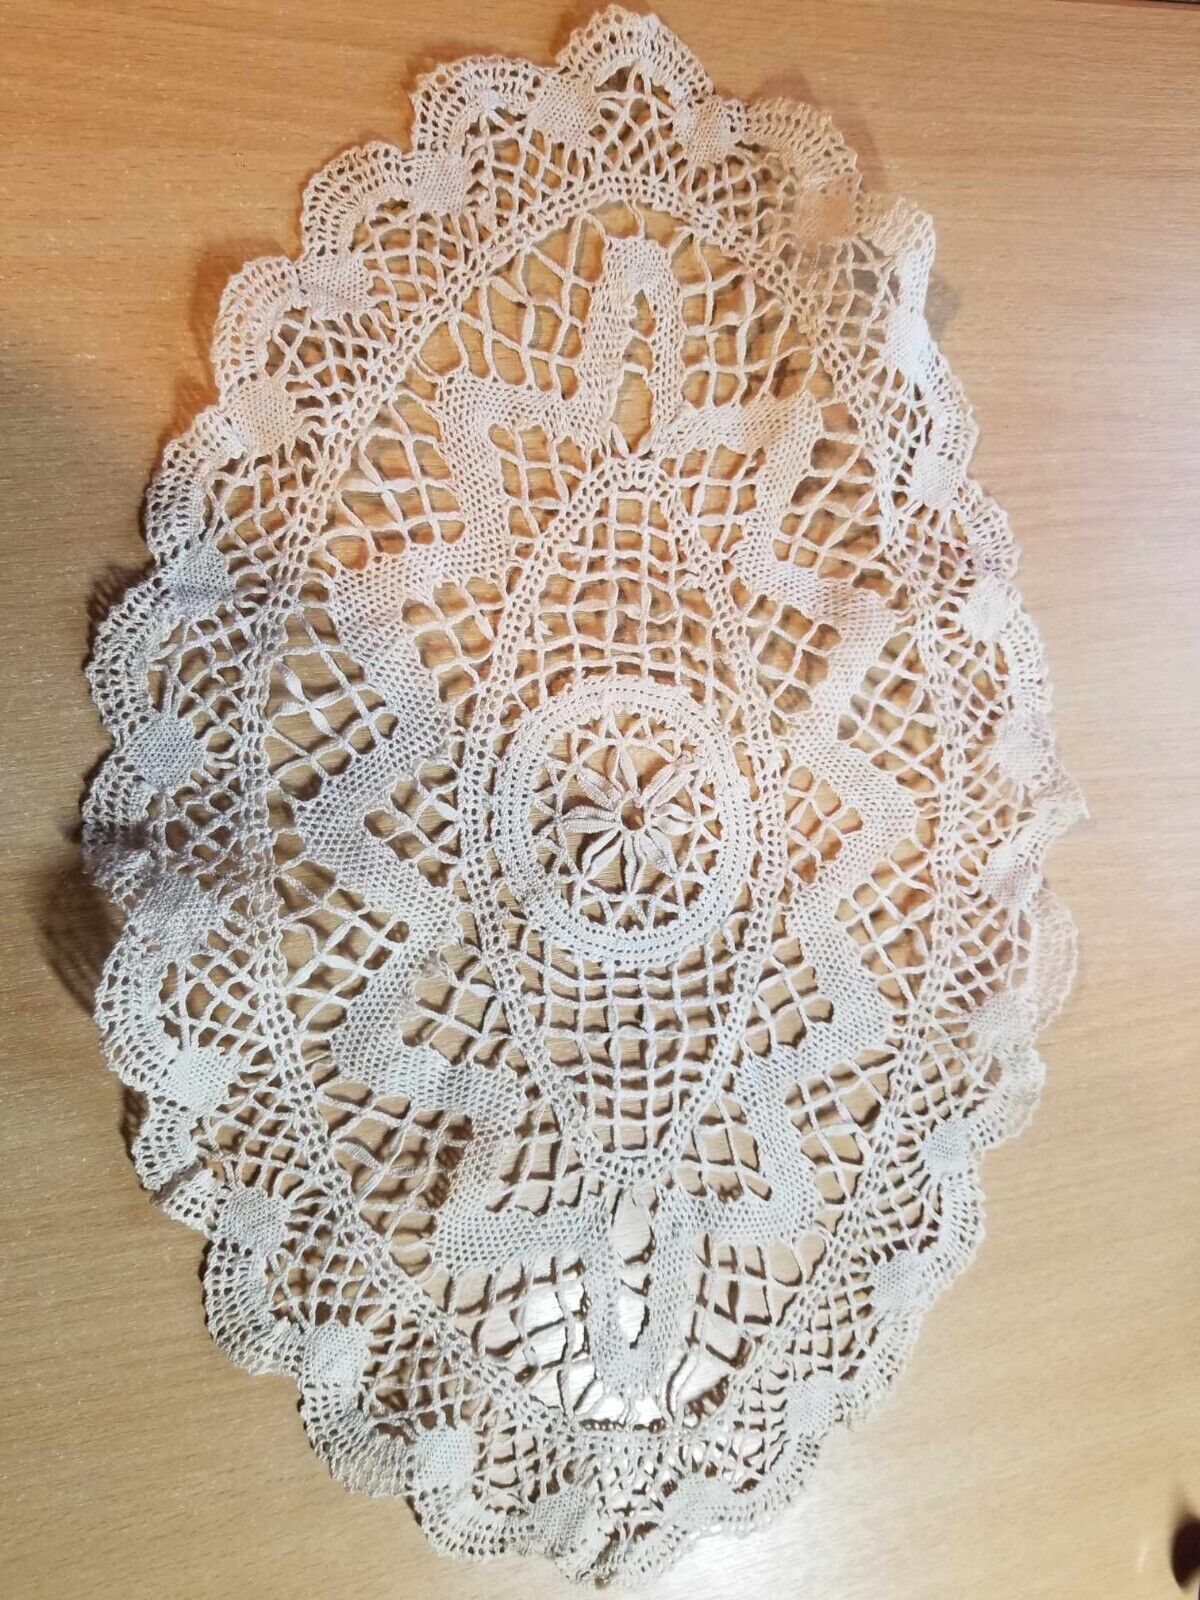 Antique Vintage Handmade Lace Crochet Vase Mat Doily OVAL 16 inches